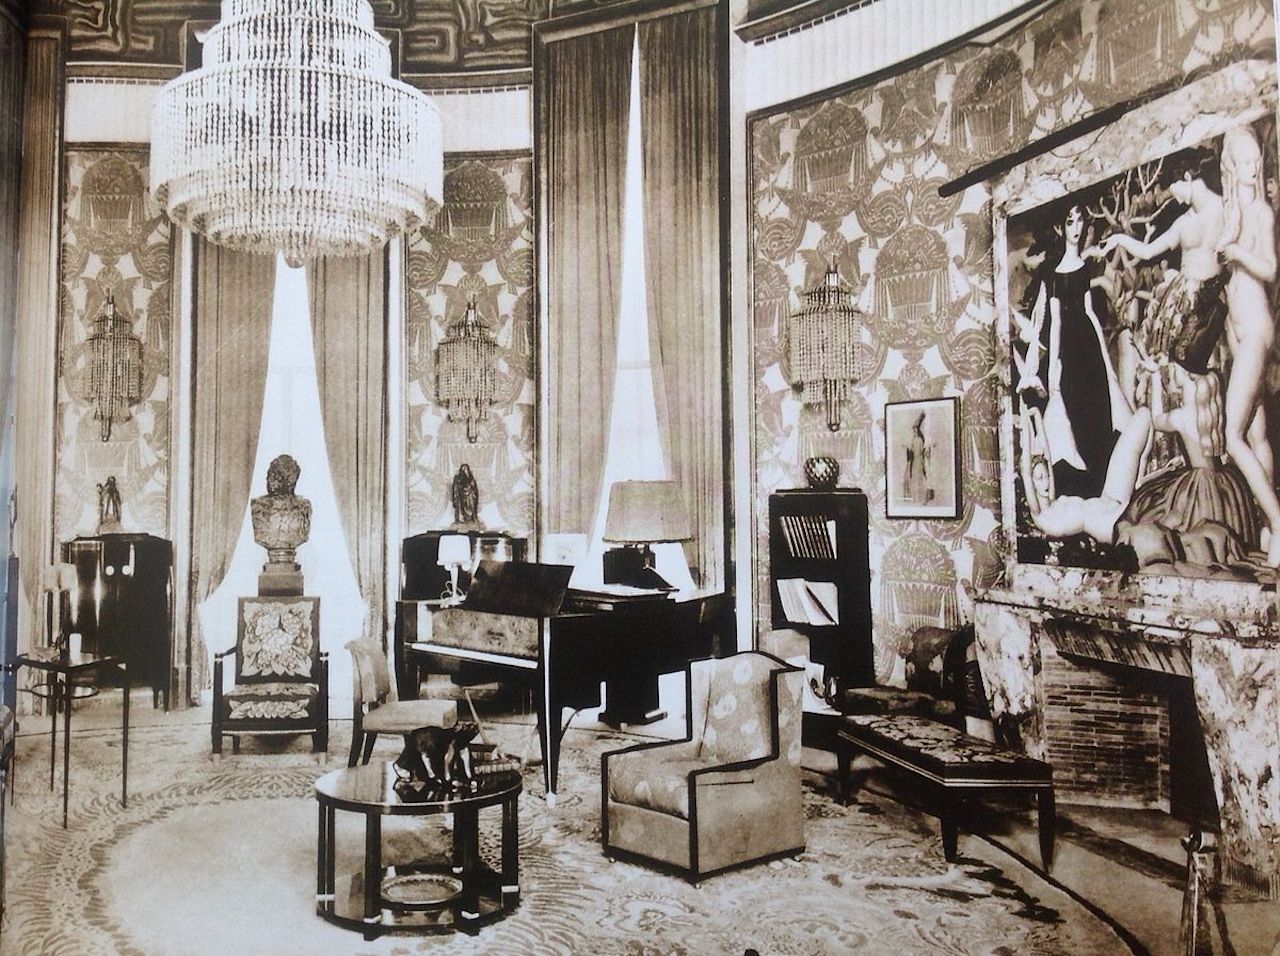 art deco bedroom ideas inspiration history origins Salon of the Hotel du Collectionneur from the 1925 International Exposition of Decorative Arts